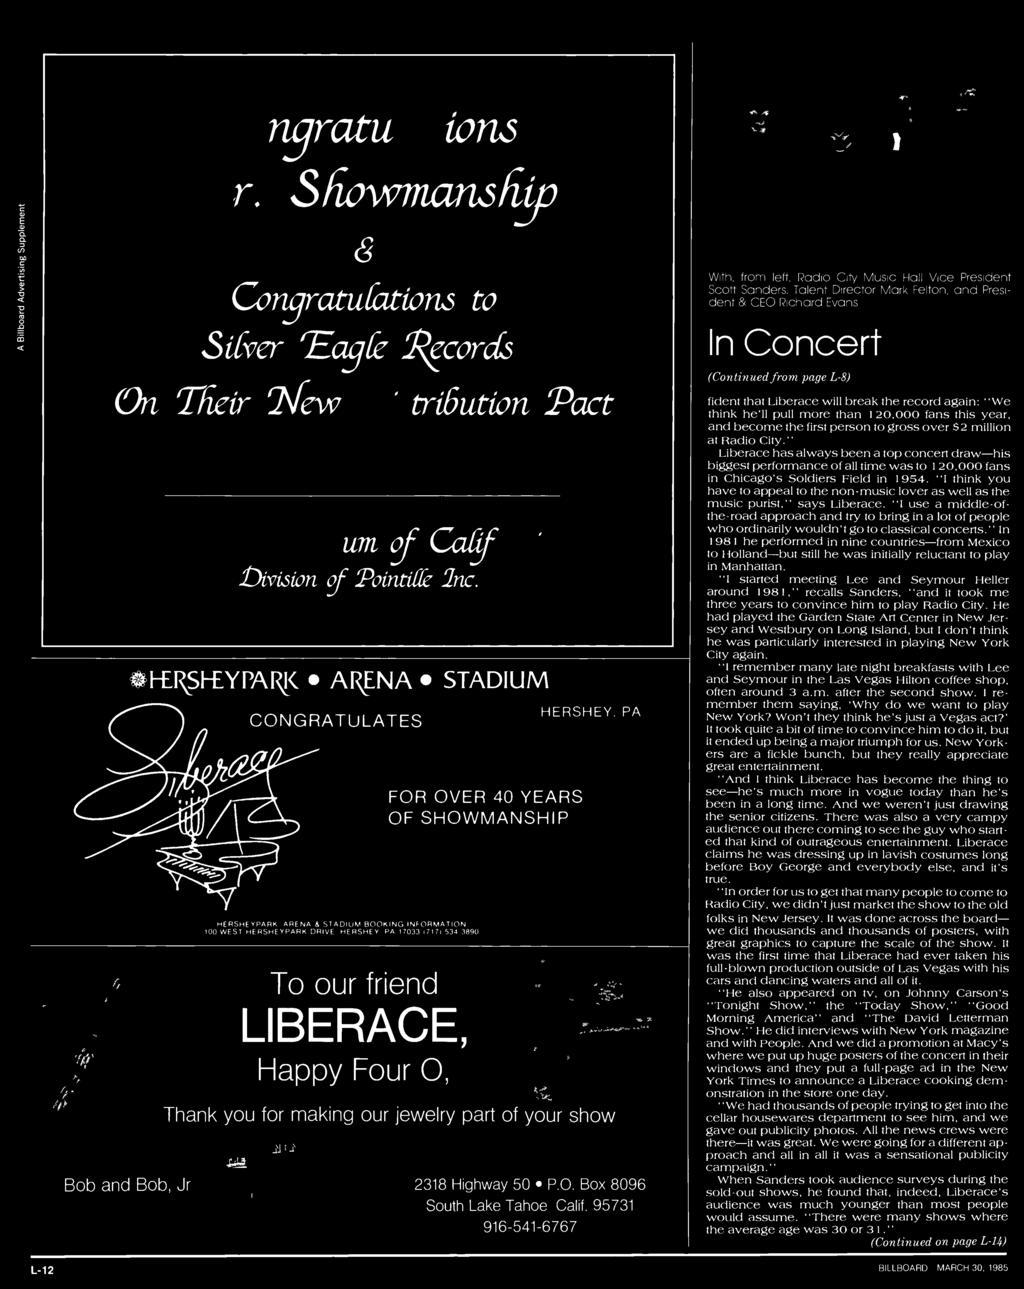 In Concert (Continued from page L -8) fident that Liberace will break the record again: We think he'll pull more than 120,000 fans this year, and become the first person to gross over $2 million at